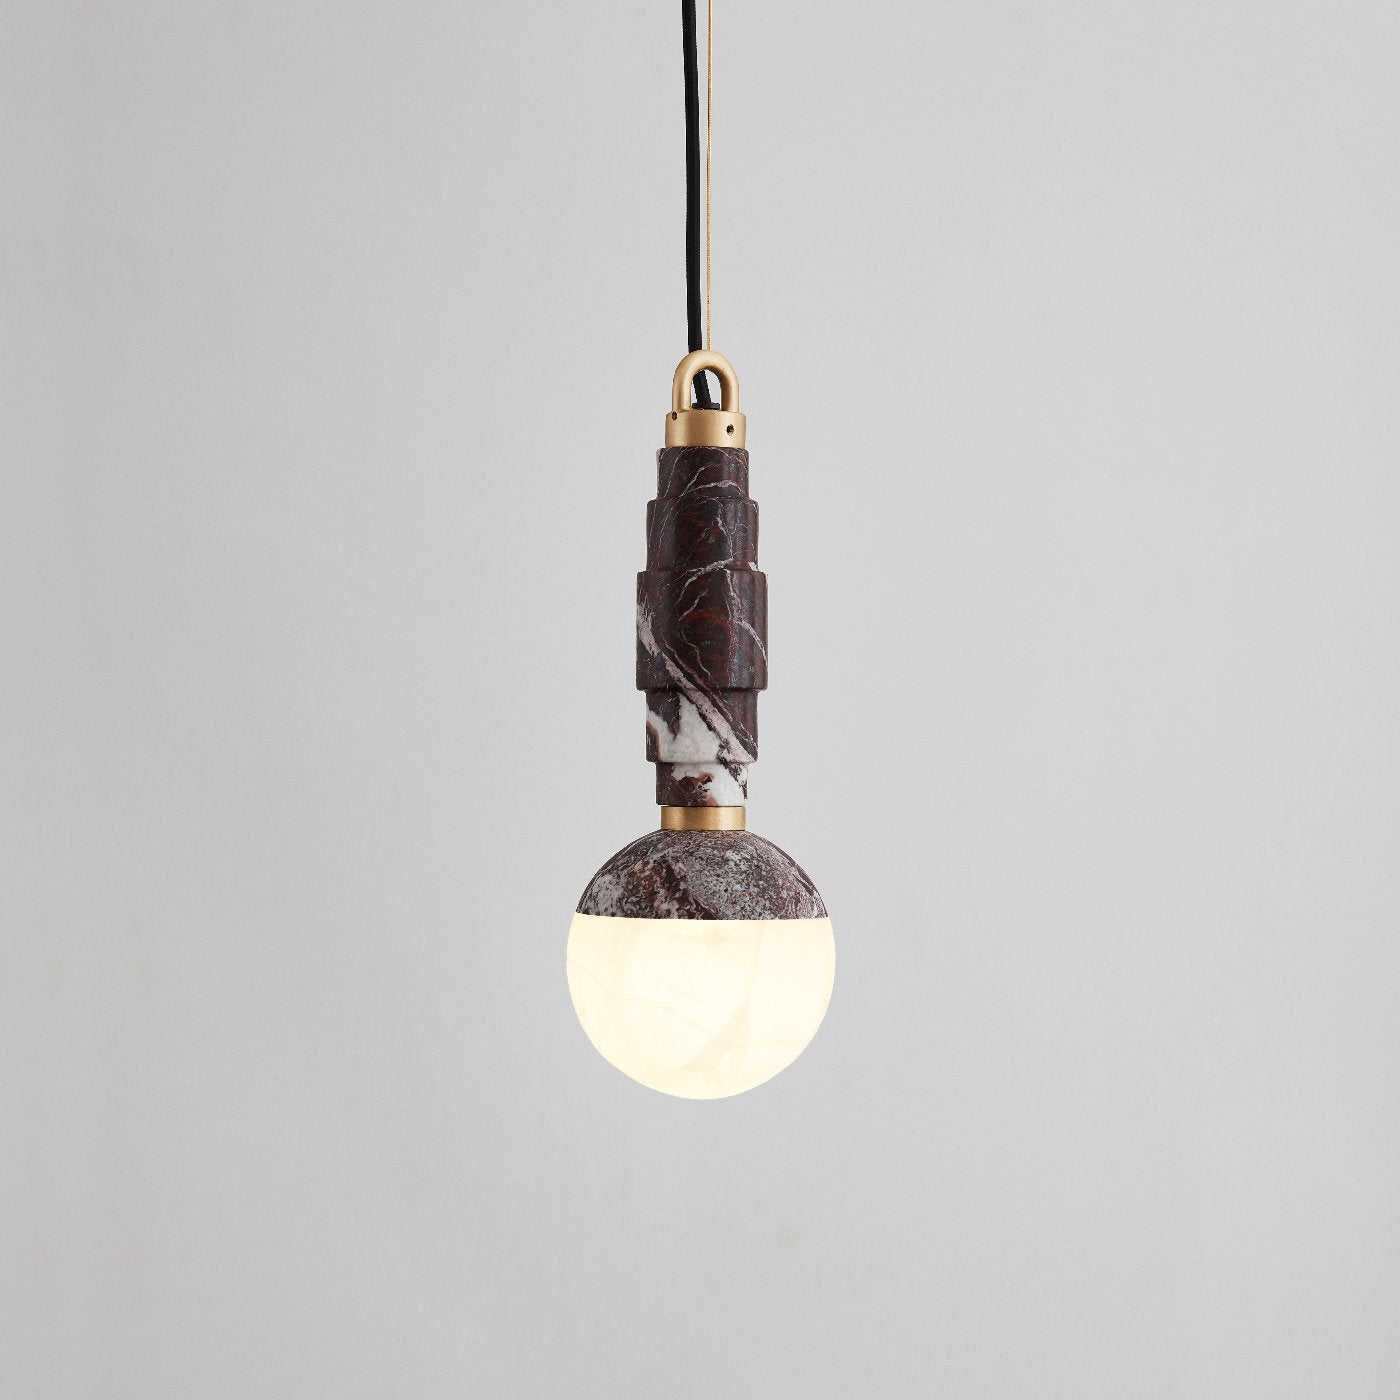 Lunar Pendant Lamp in Rosso Levanto Marble and Onyx  - Alternative view 3